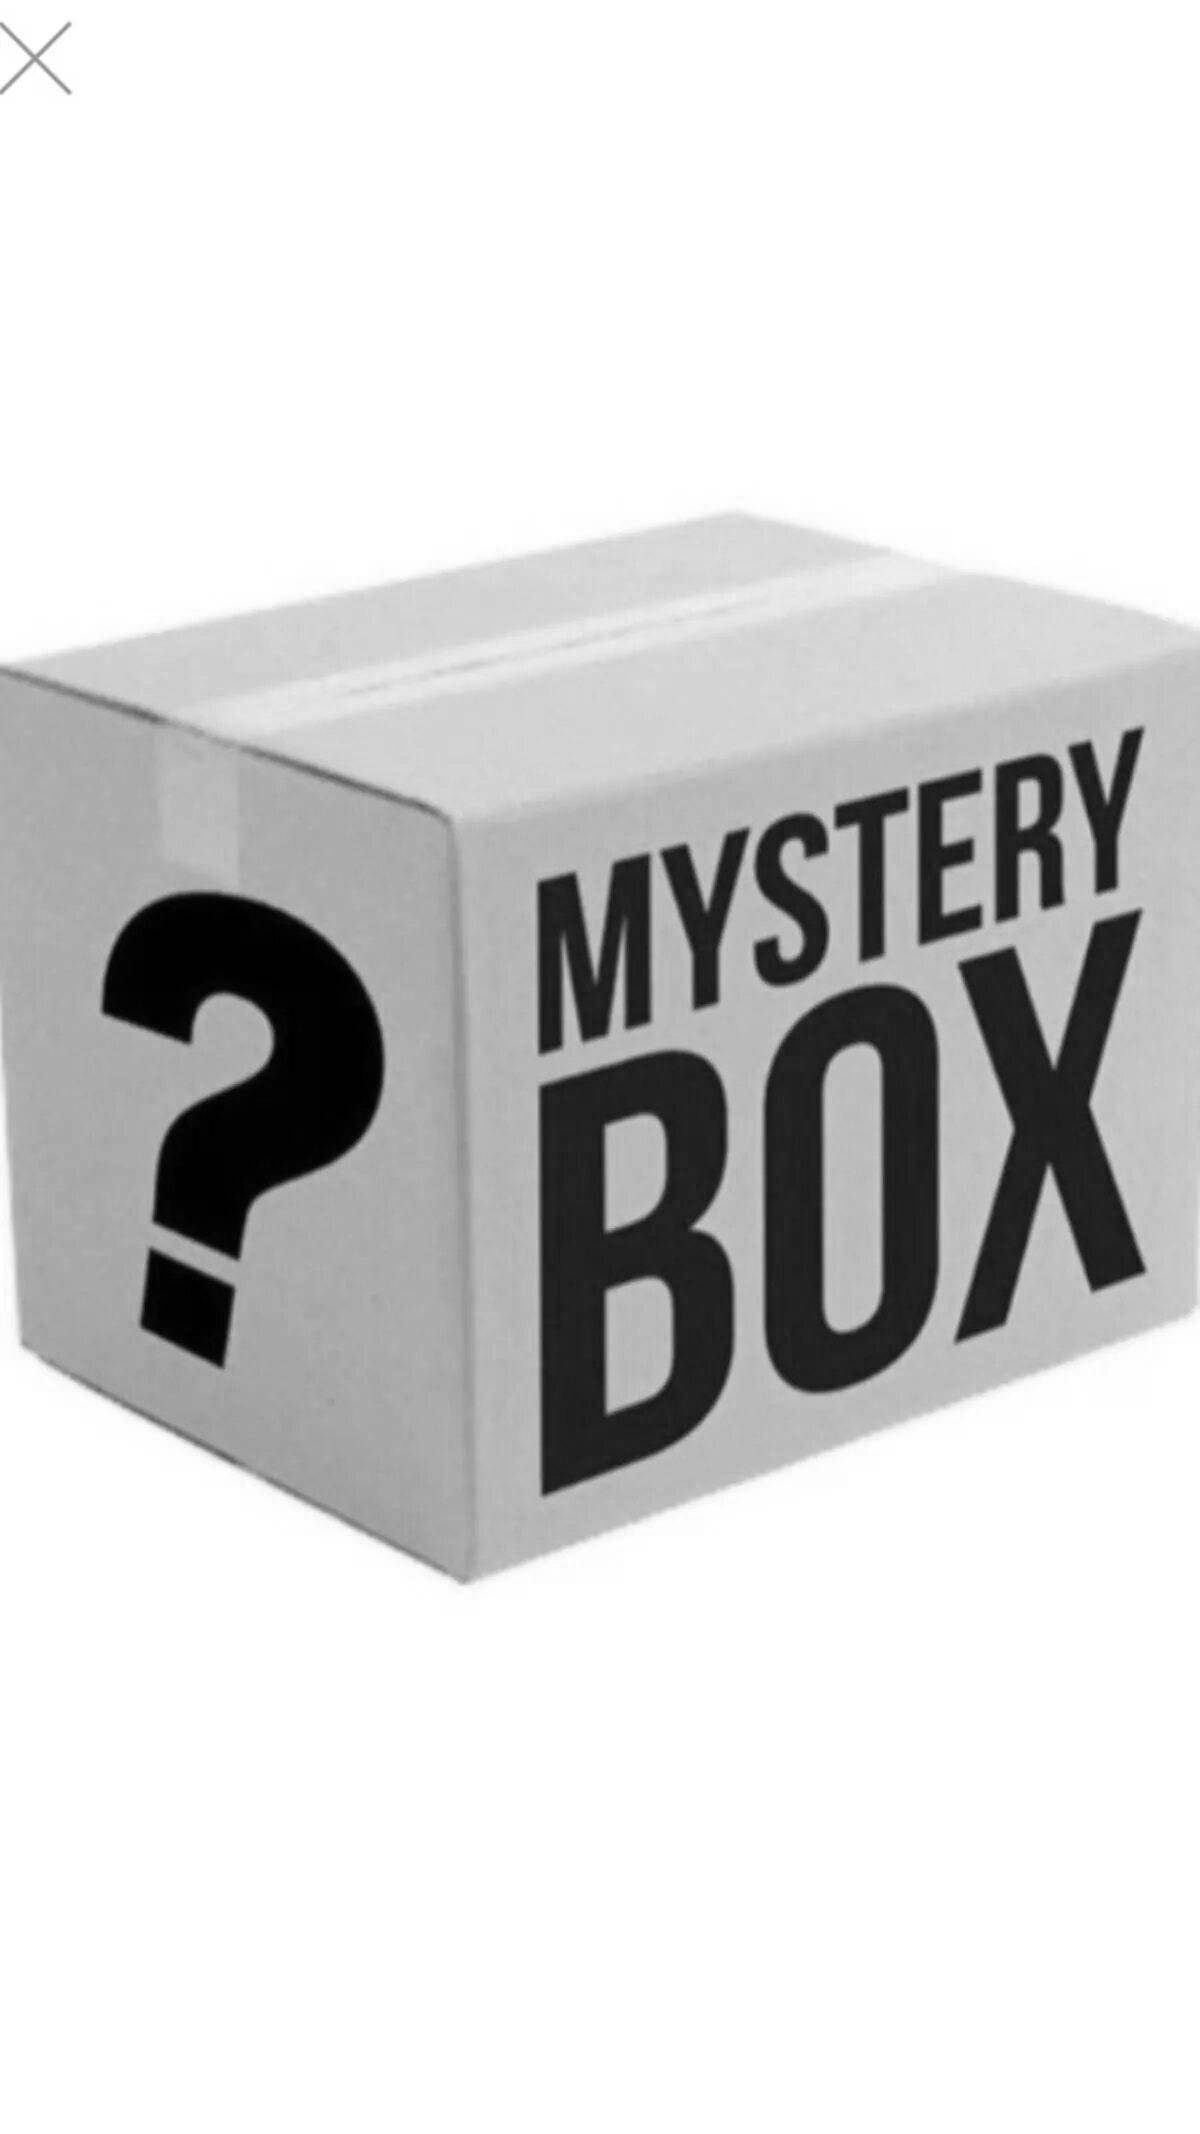 Charon's enticing mystery box